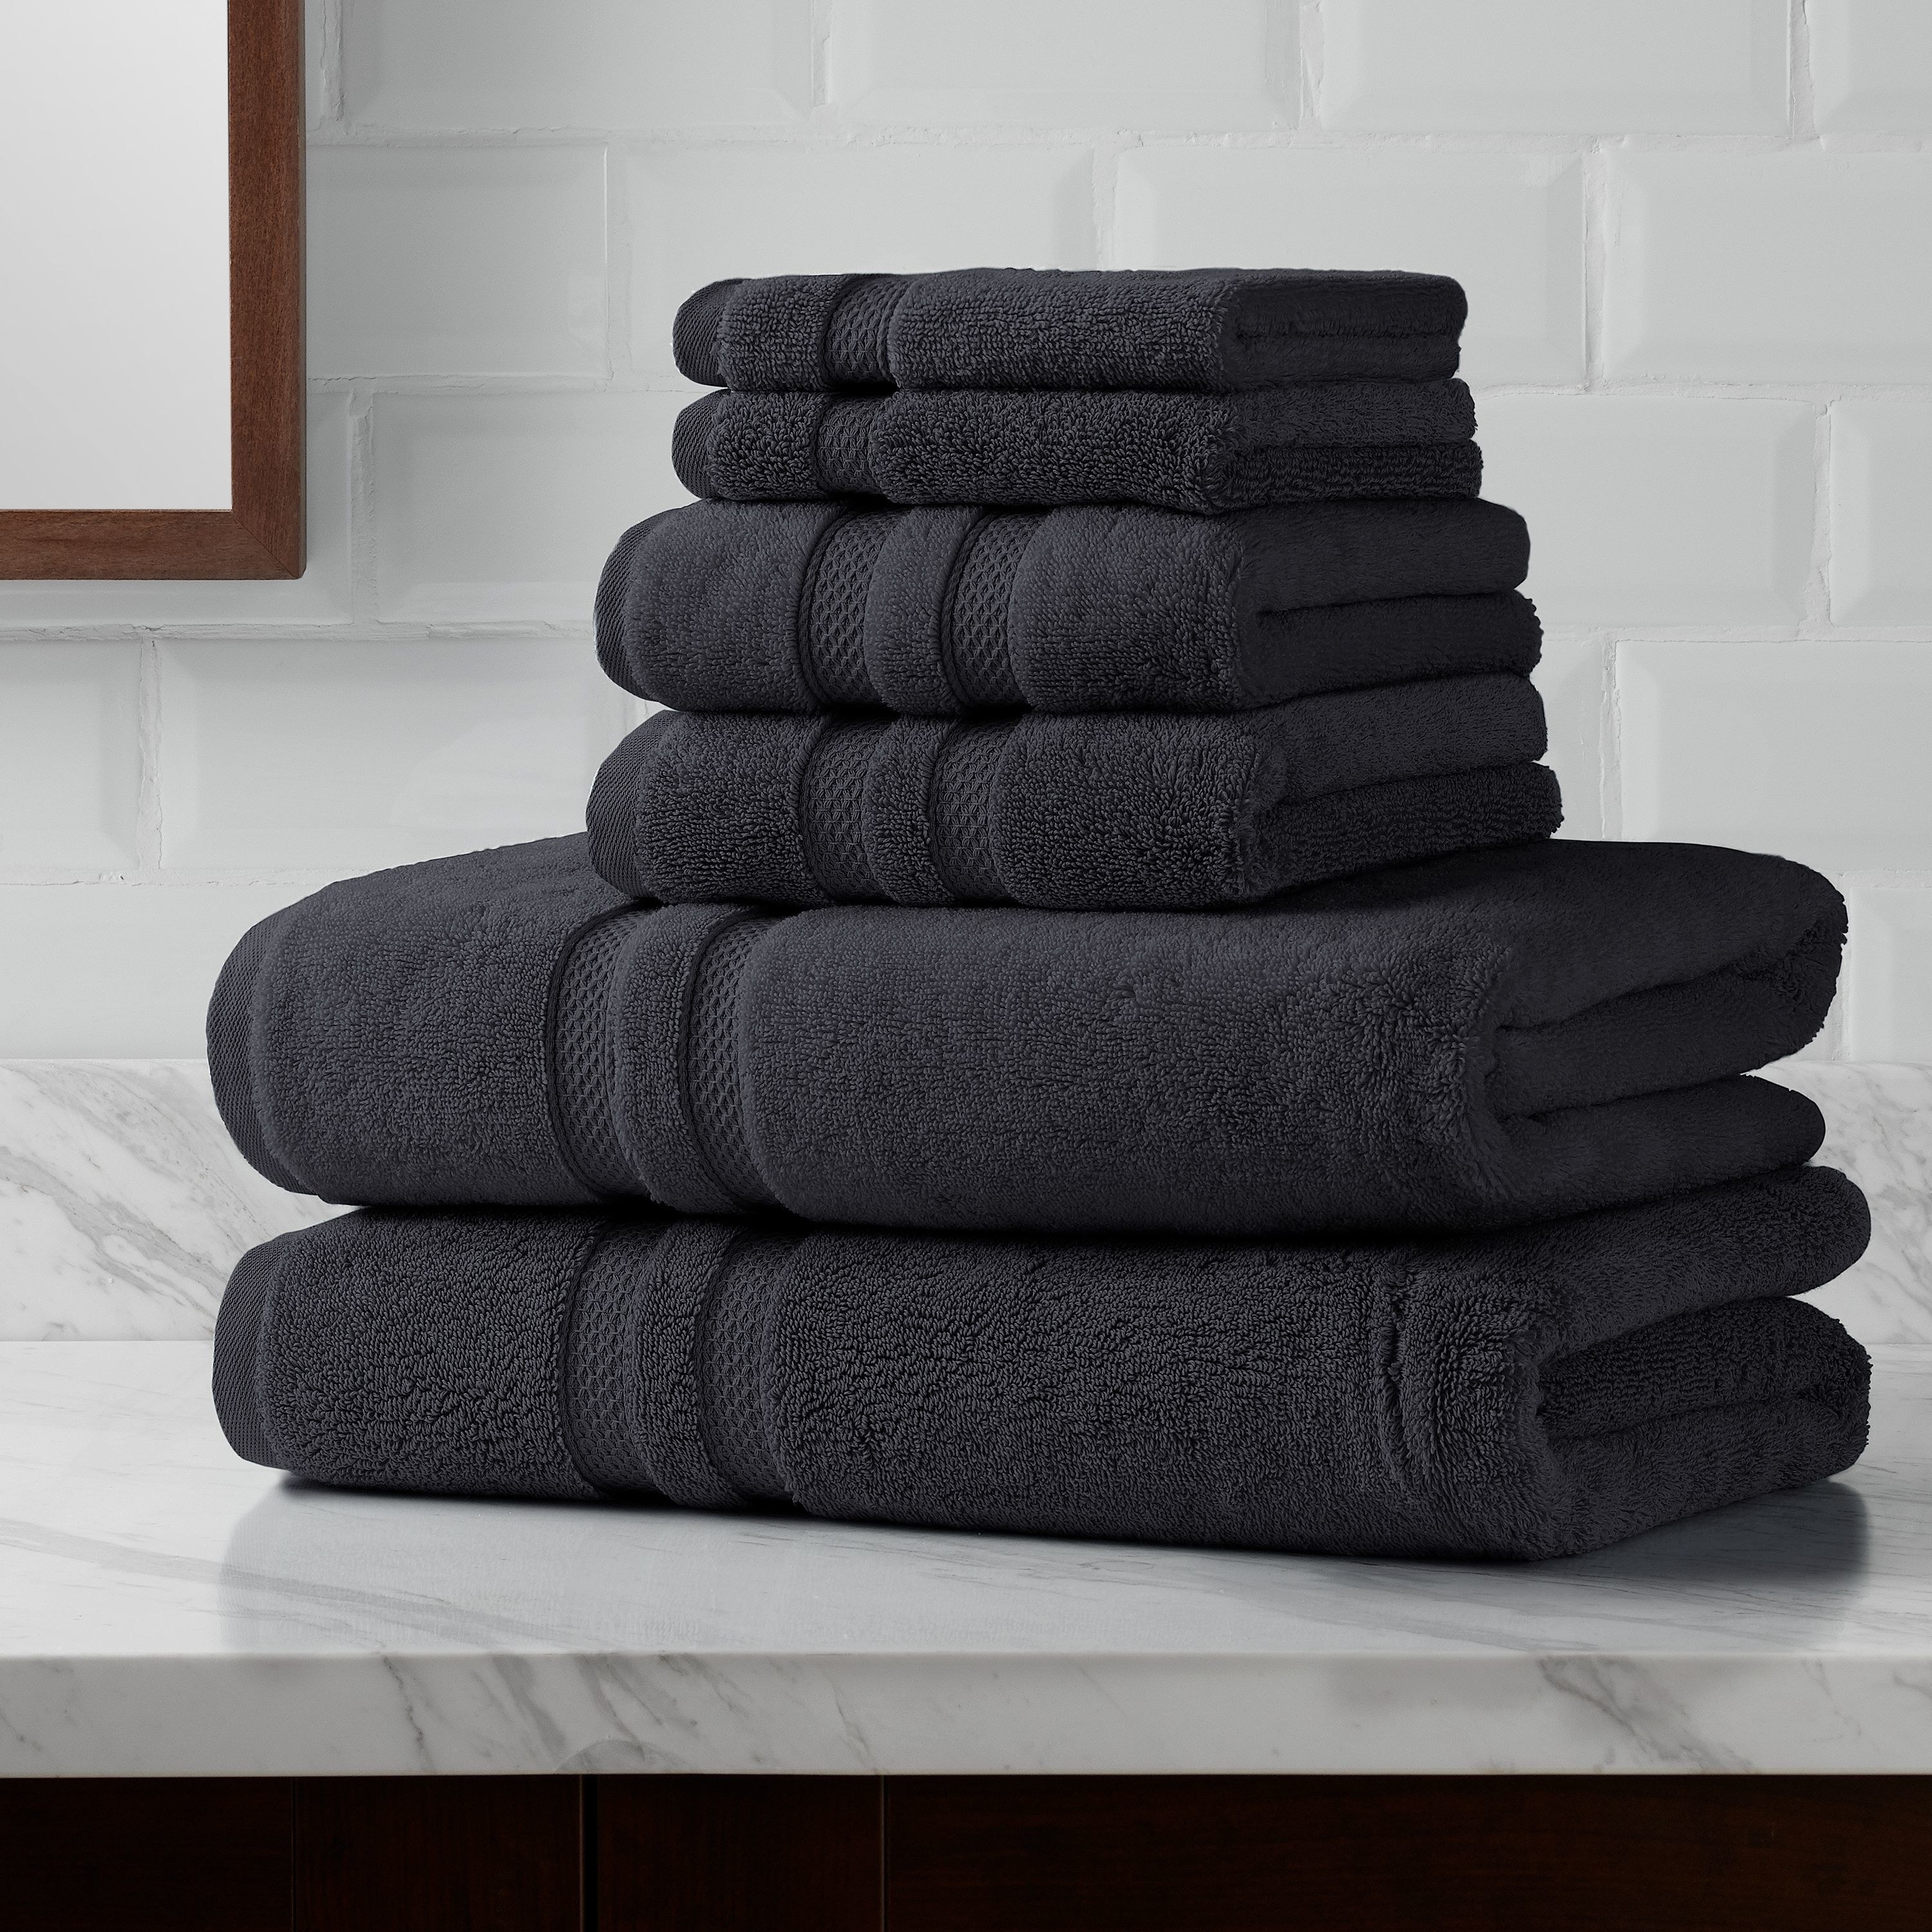 the 6-piece granite turkish towel set folded and stacked on top of one another